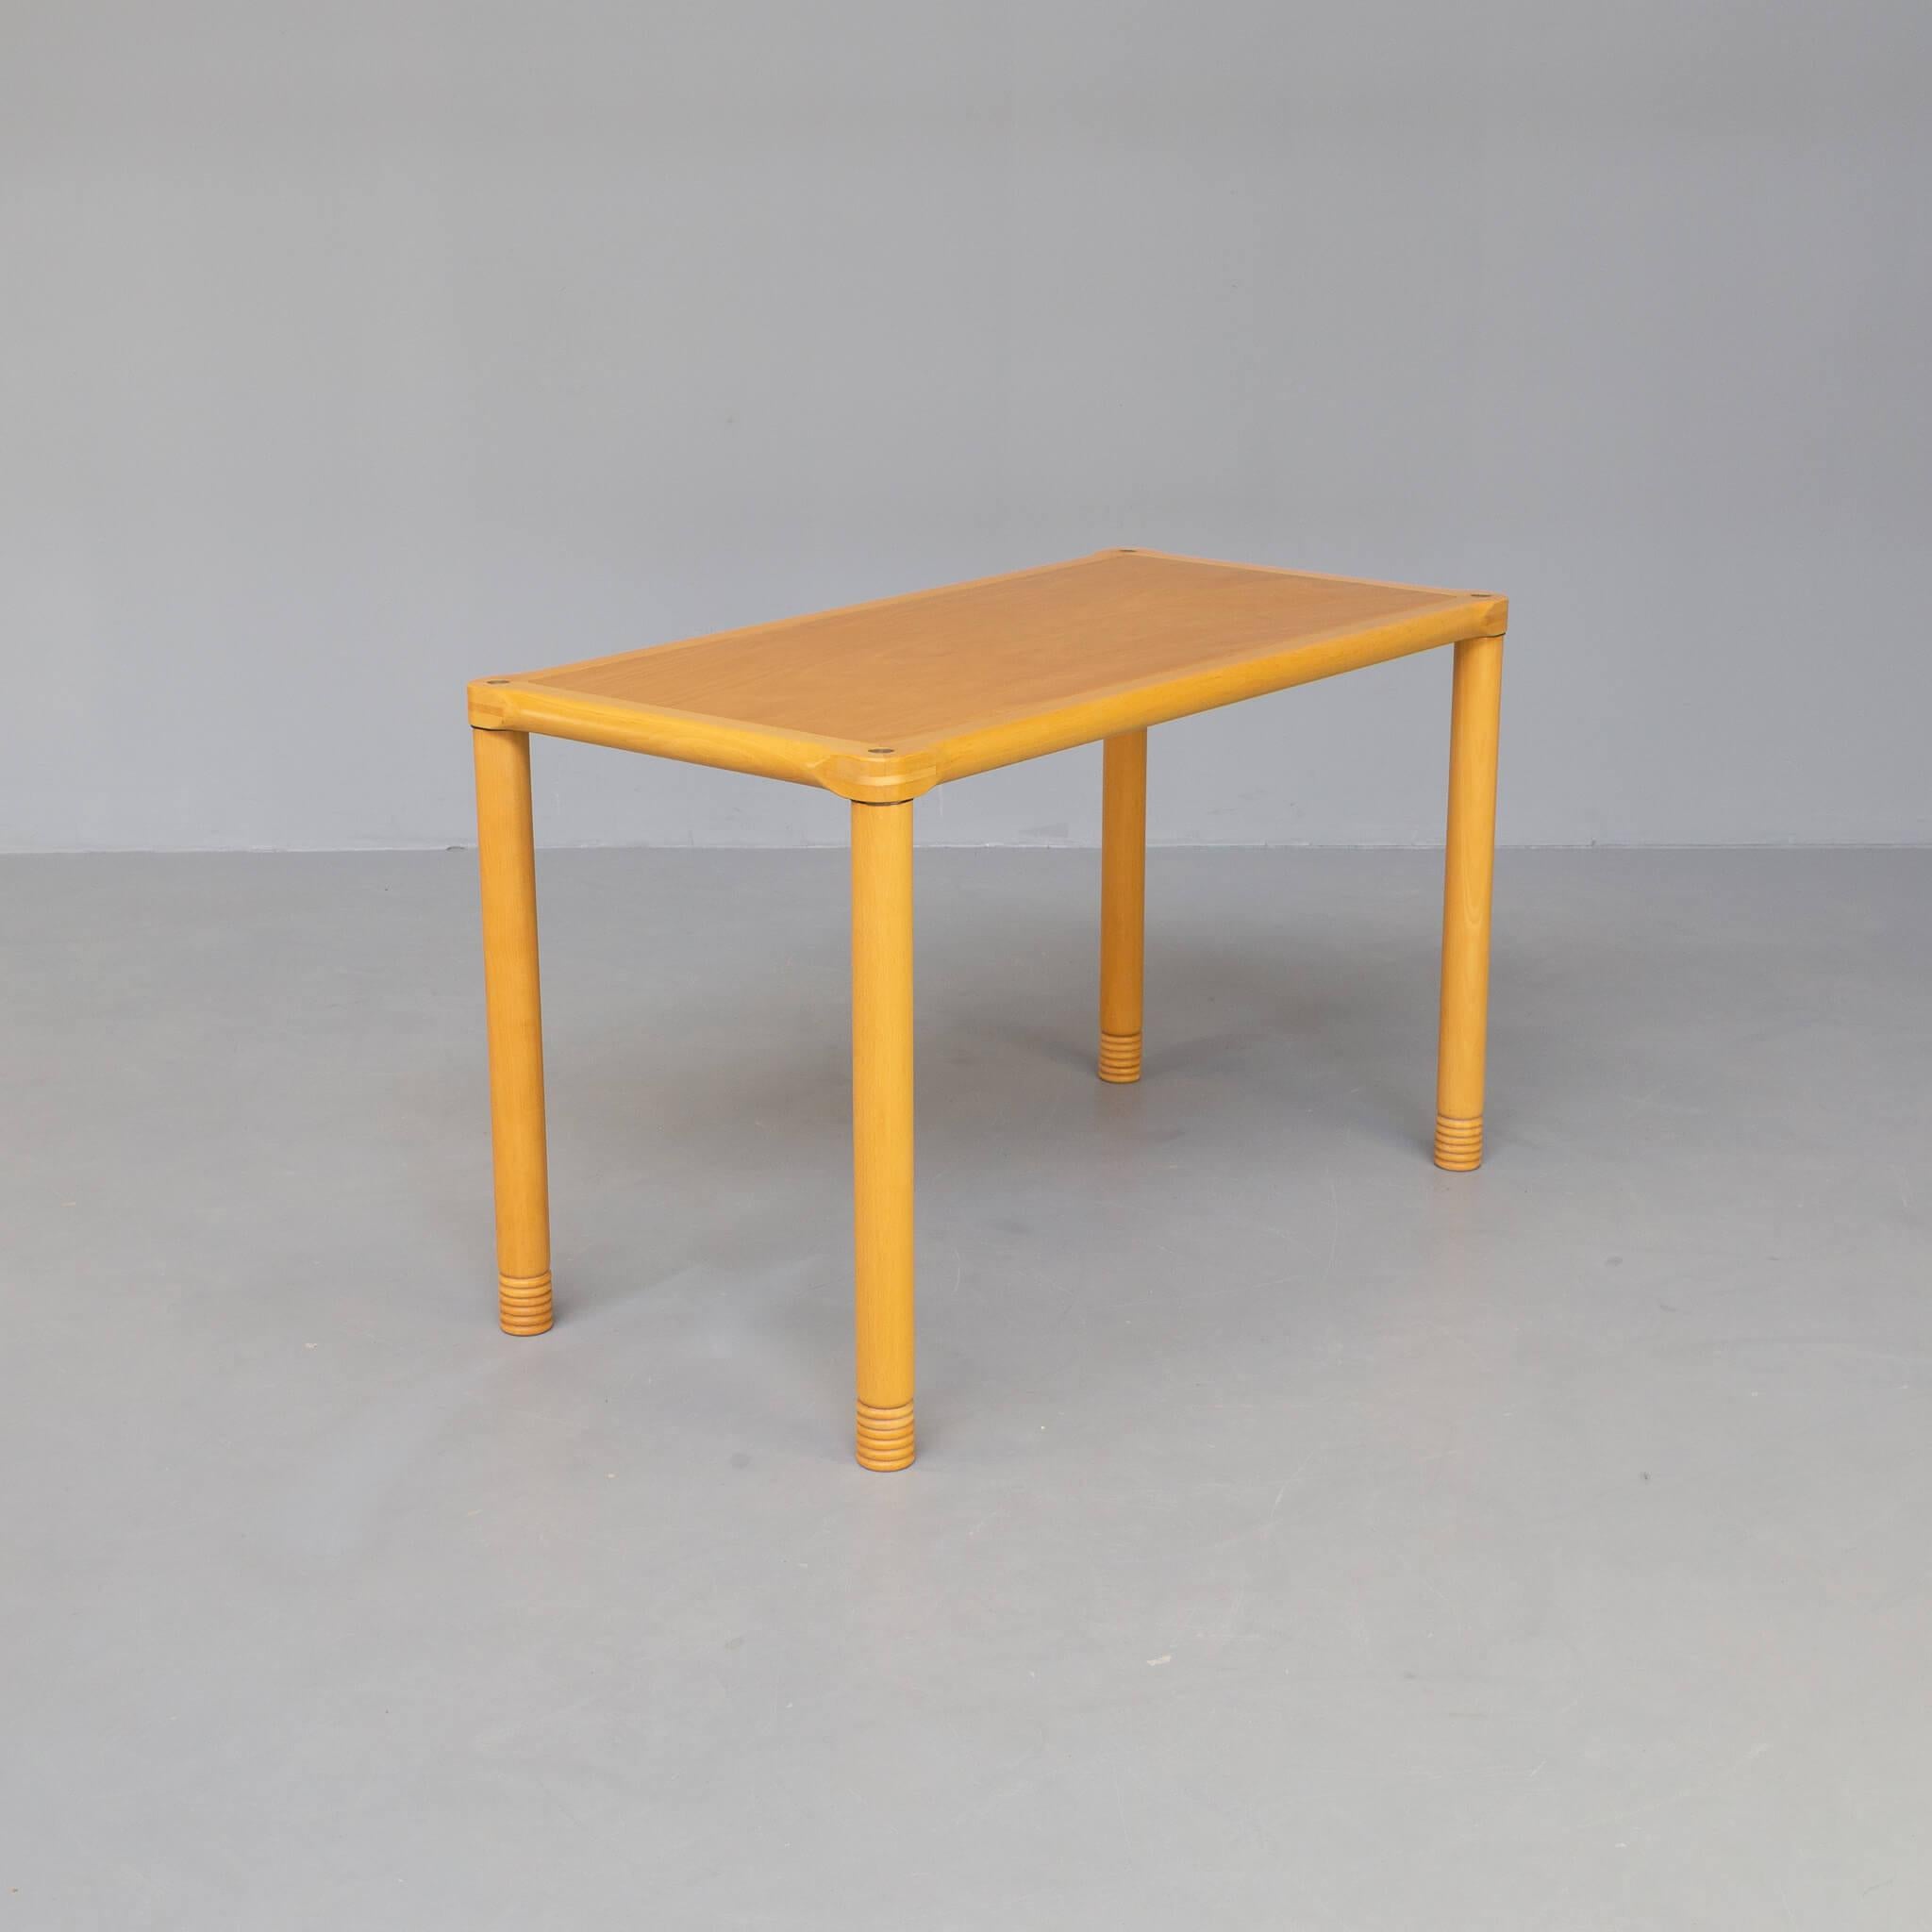 This small writing table is part of a line with desks and tables that has been designed in the 1980s by Stokke. It looks very slim lined and there are lots of details in the table that makes these tables very beautiful.